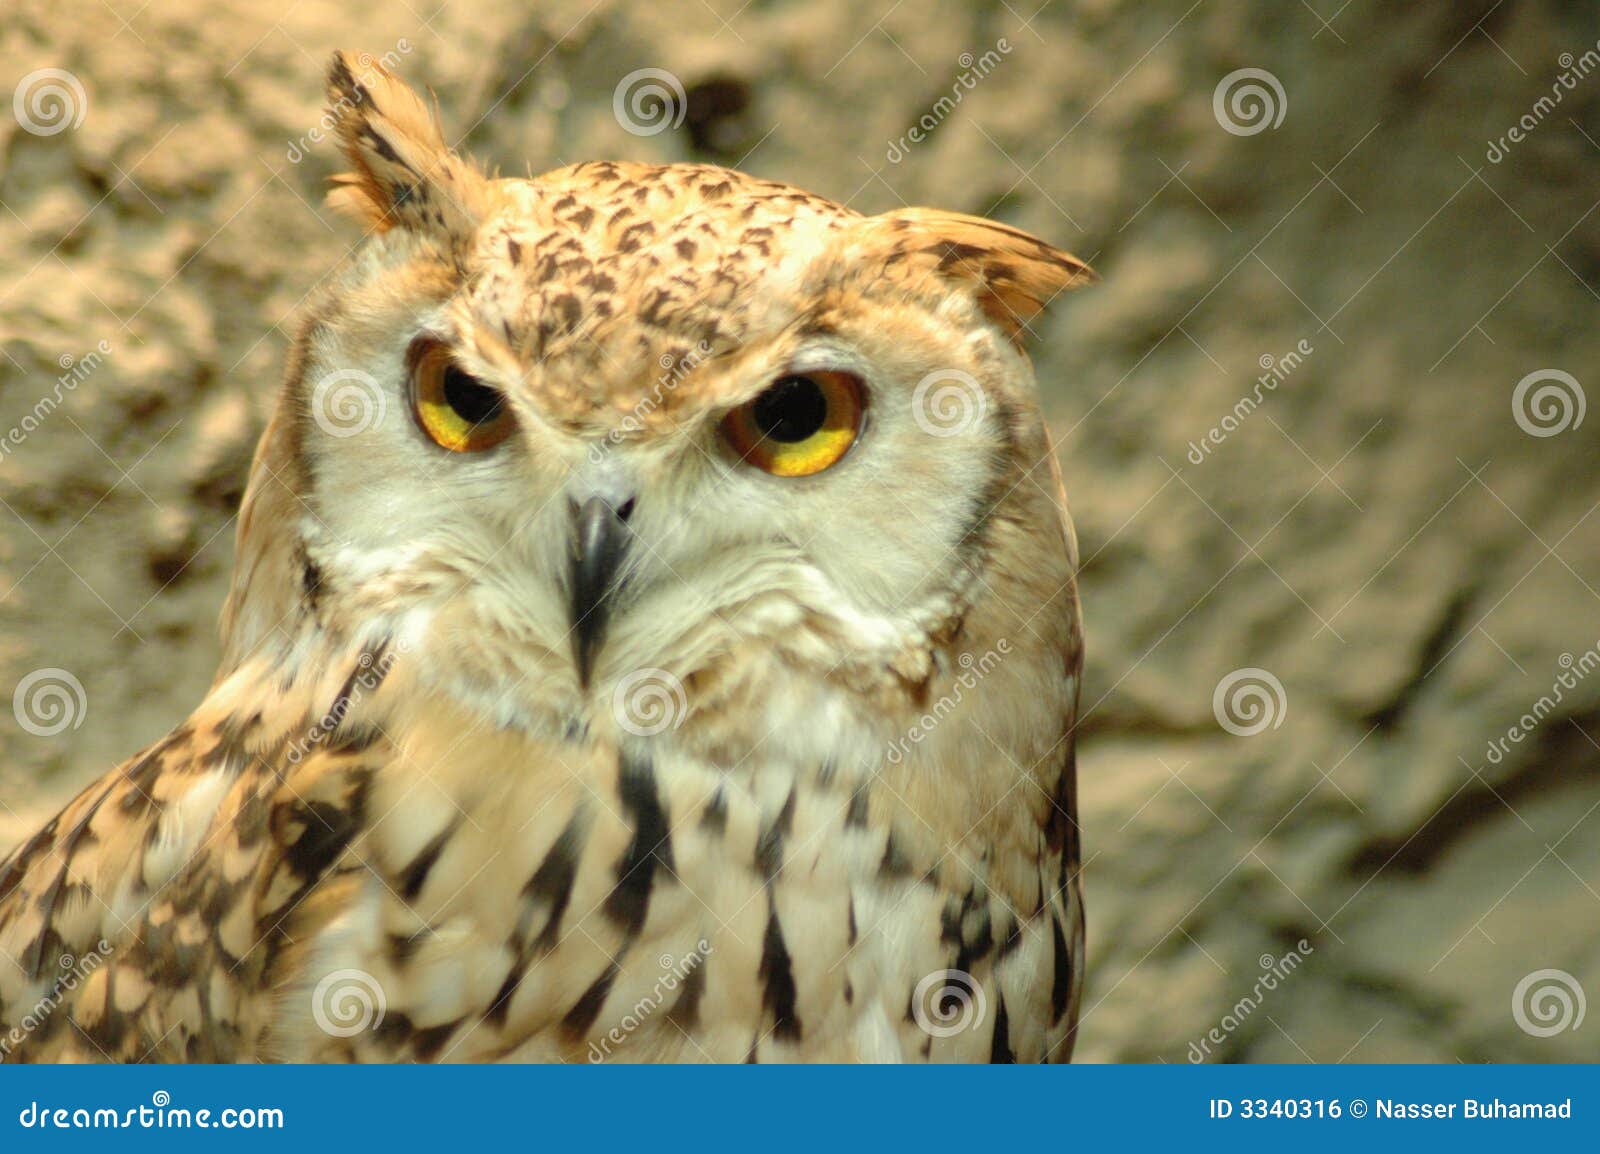 Owl in kuwait stock photo. Image of hooked, observing - 3340316